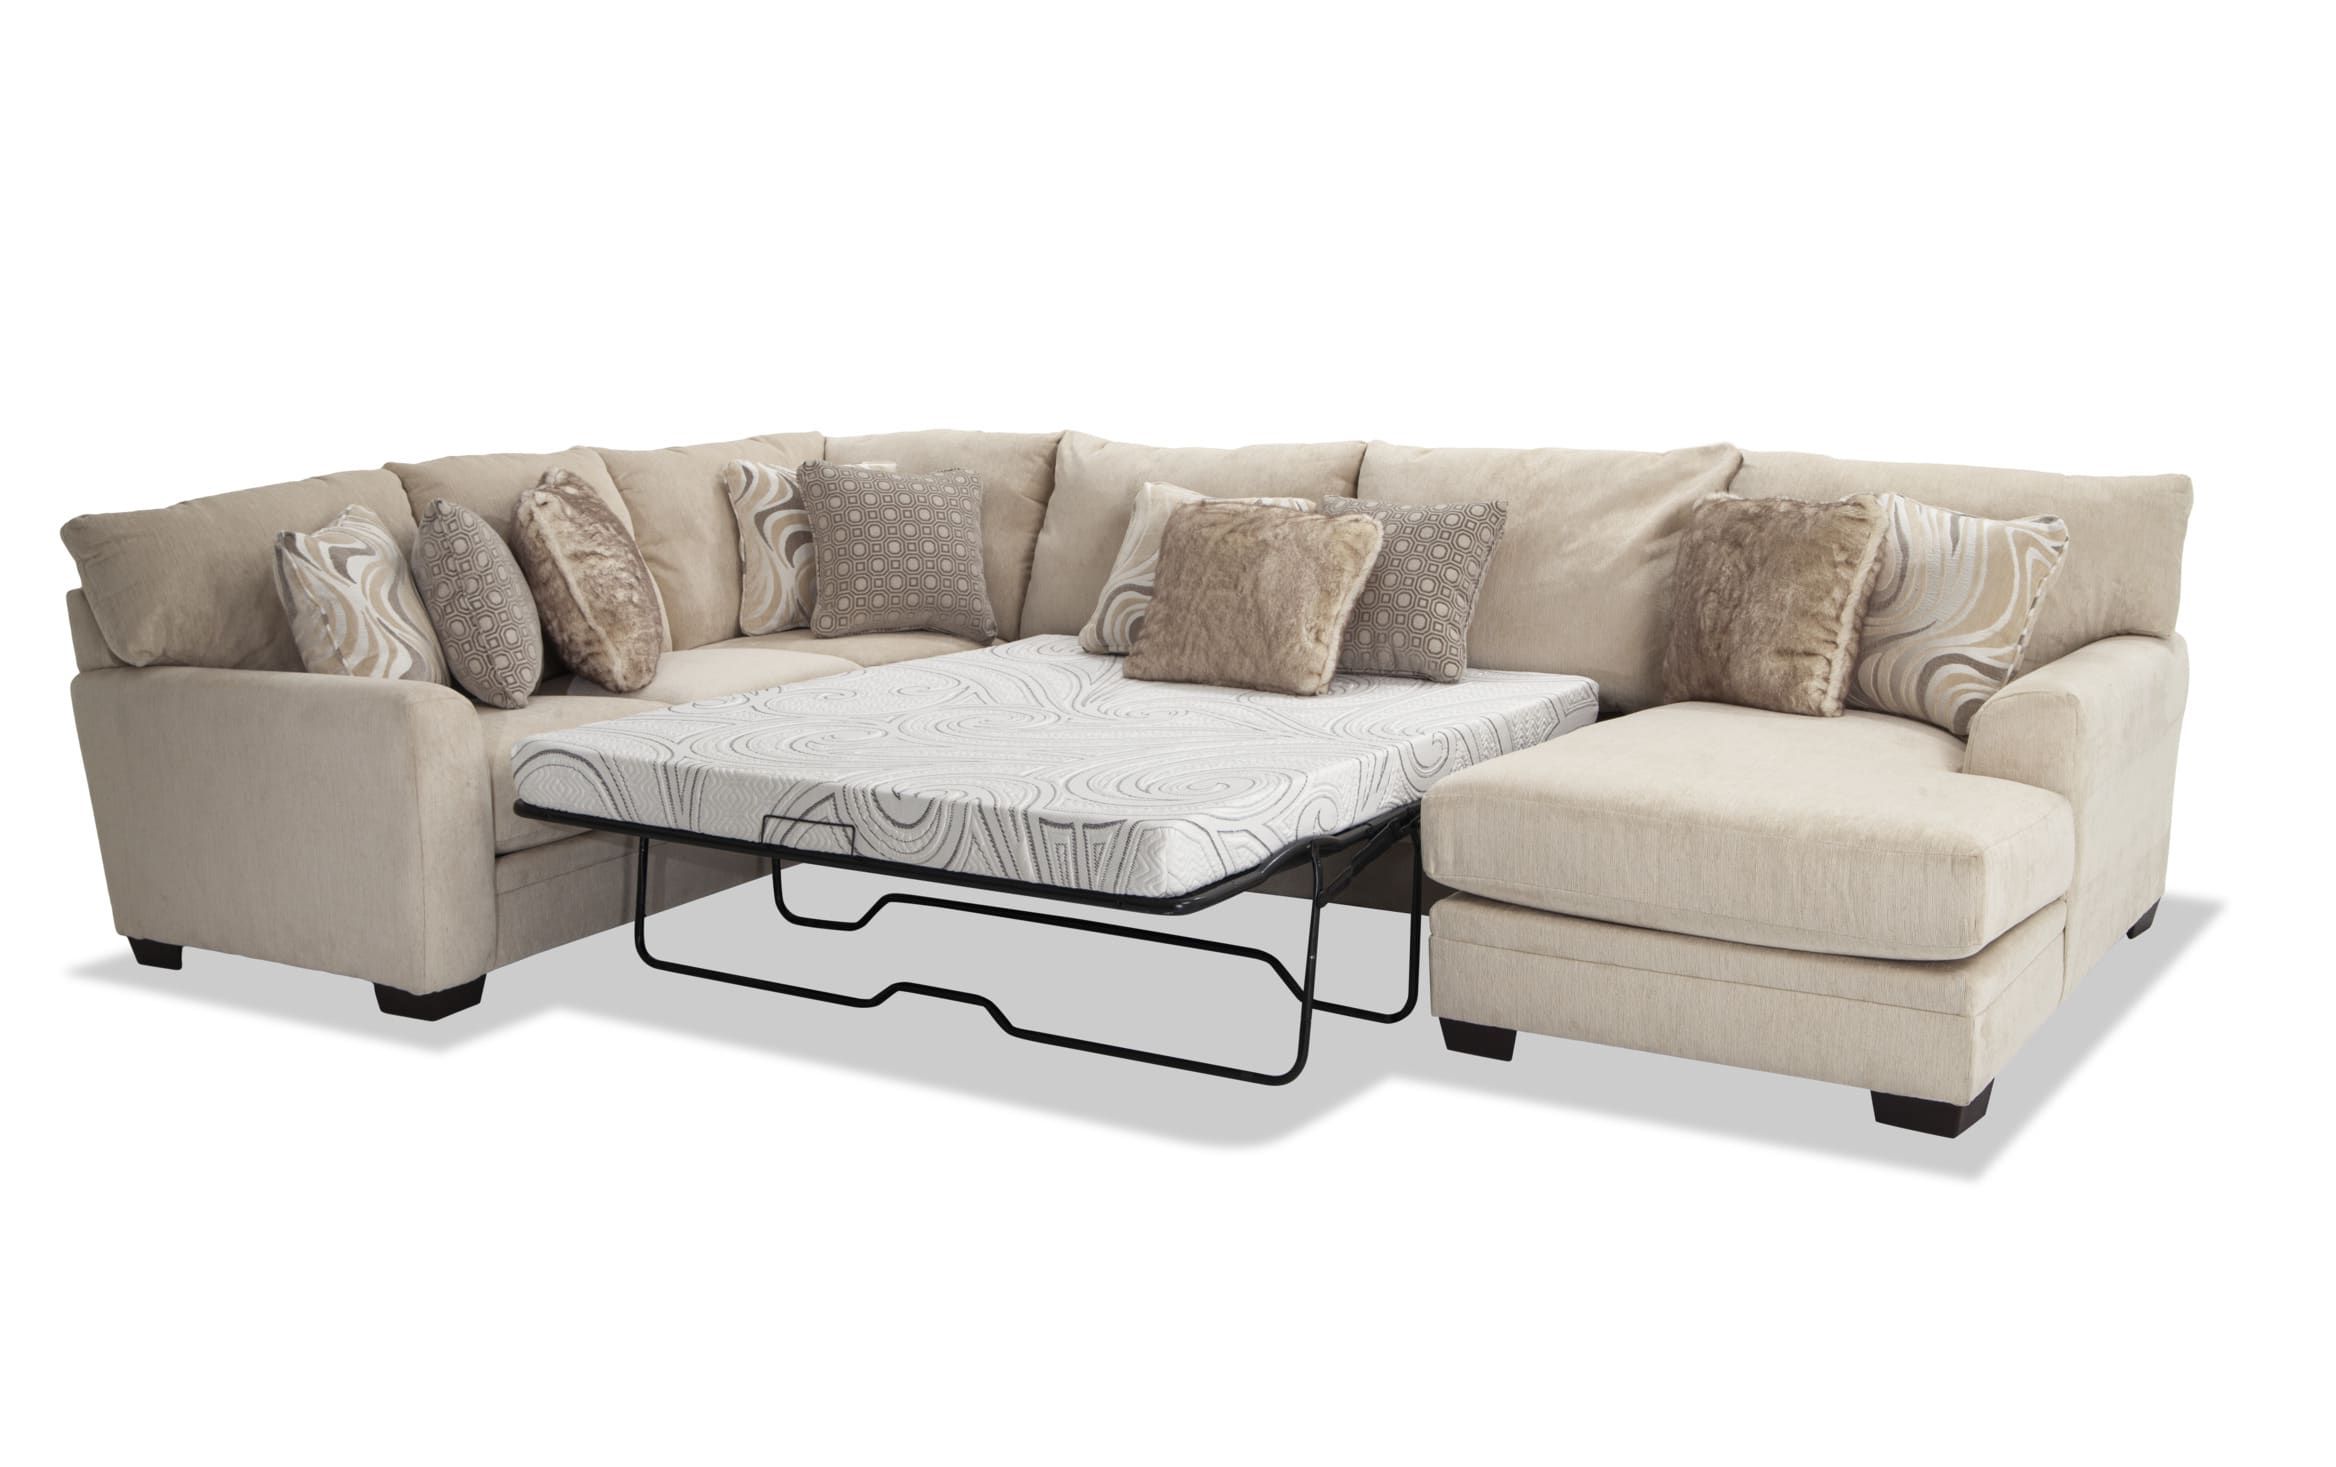 Luxe Cream 4 Piece Right Arm Facing Bob O Pedic Cooling Queen Sleeper  Sectional With Chaise | Bob's Discount Furniture Regarding Left Or Right Facing Sleeper Sectional Sofas (View 4 of 20)